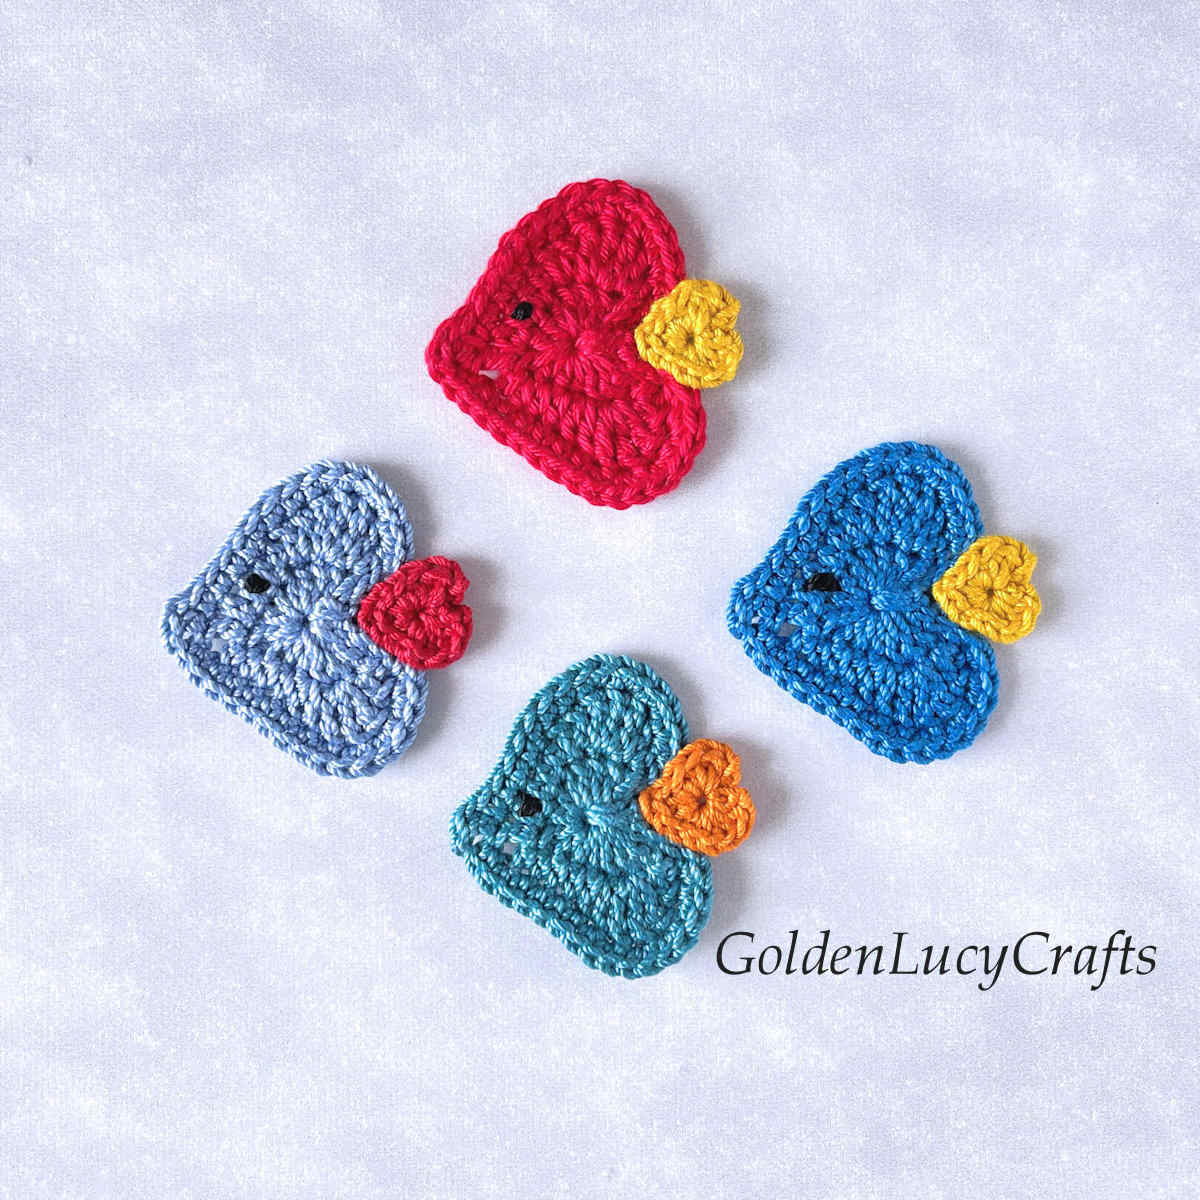 Four crocheted heart-shaped fish appliques.